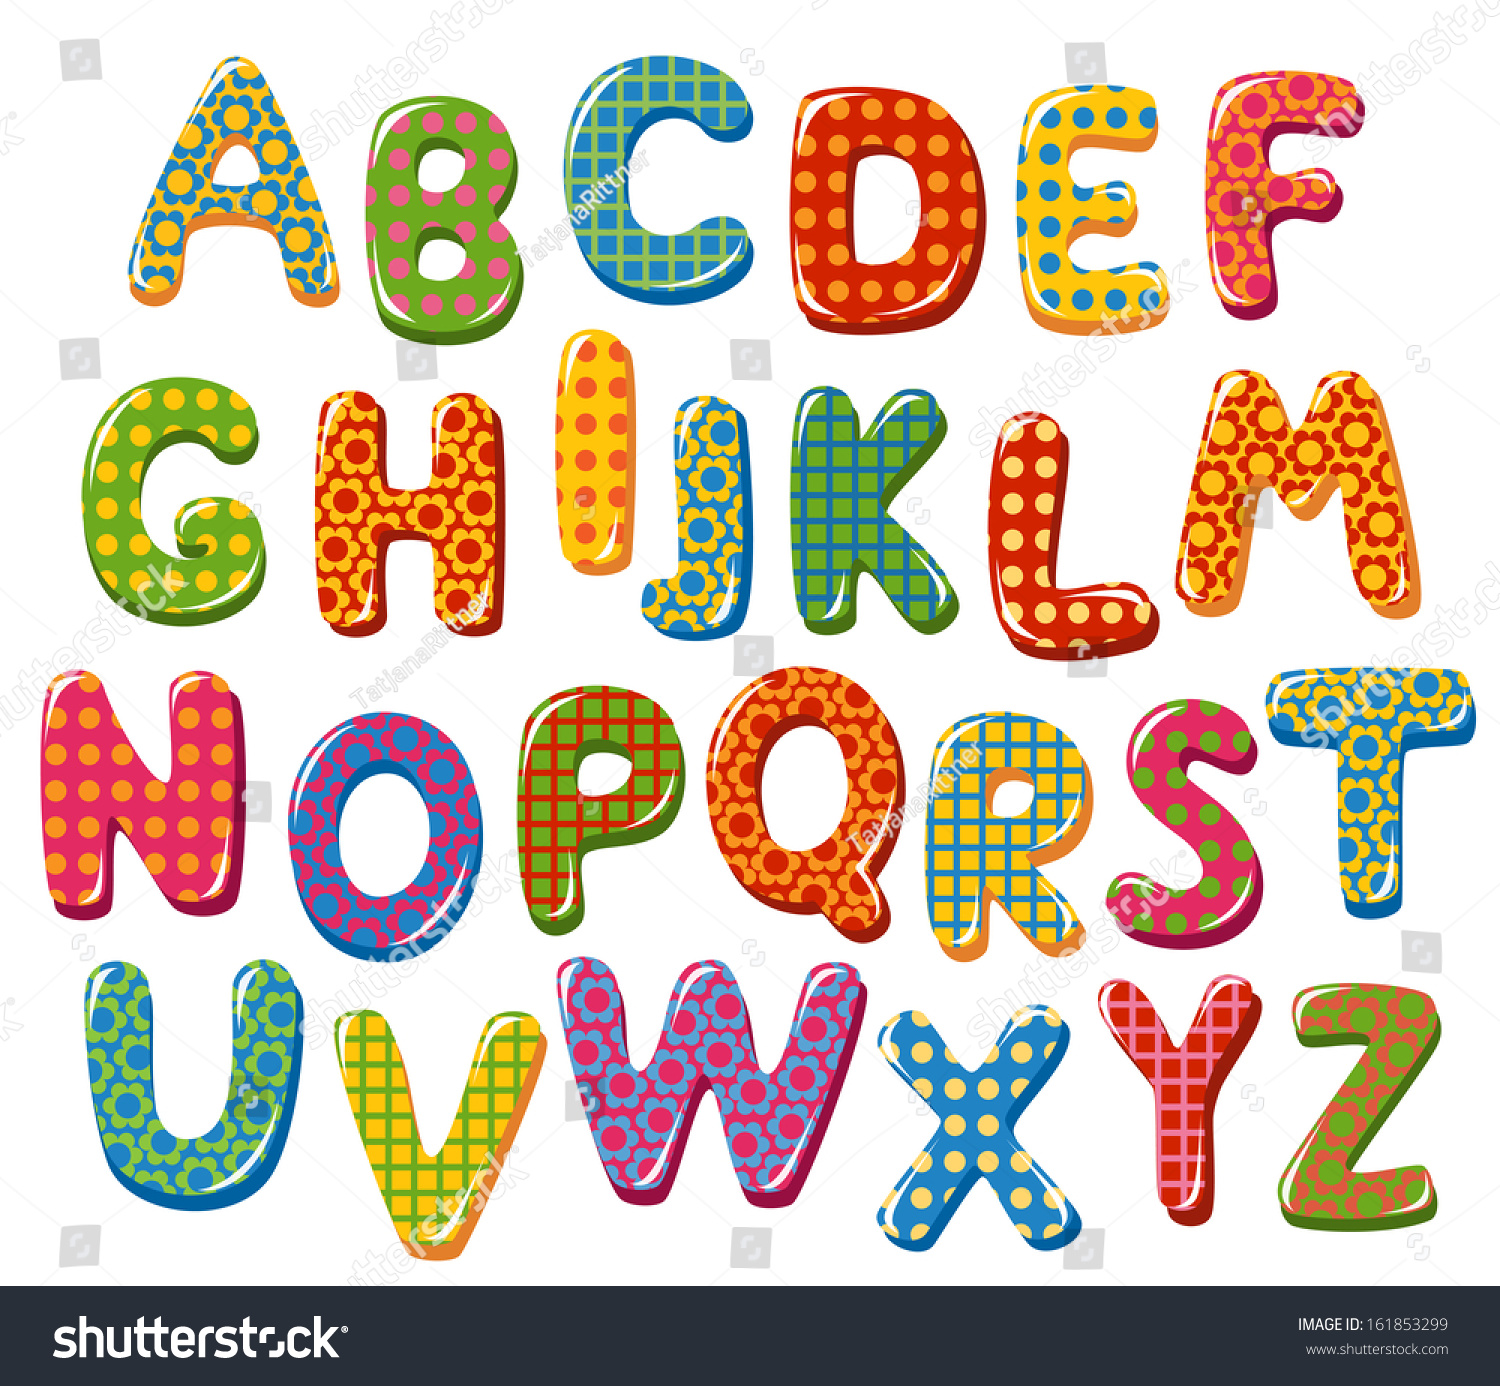 Colorful Alphabet Letters Stock Vector Illustration 161853299 ...